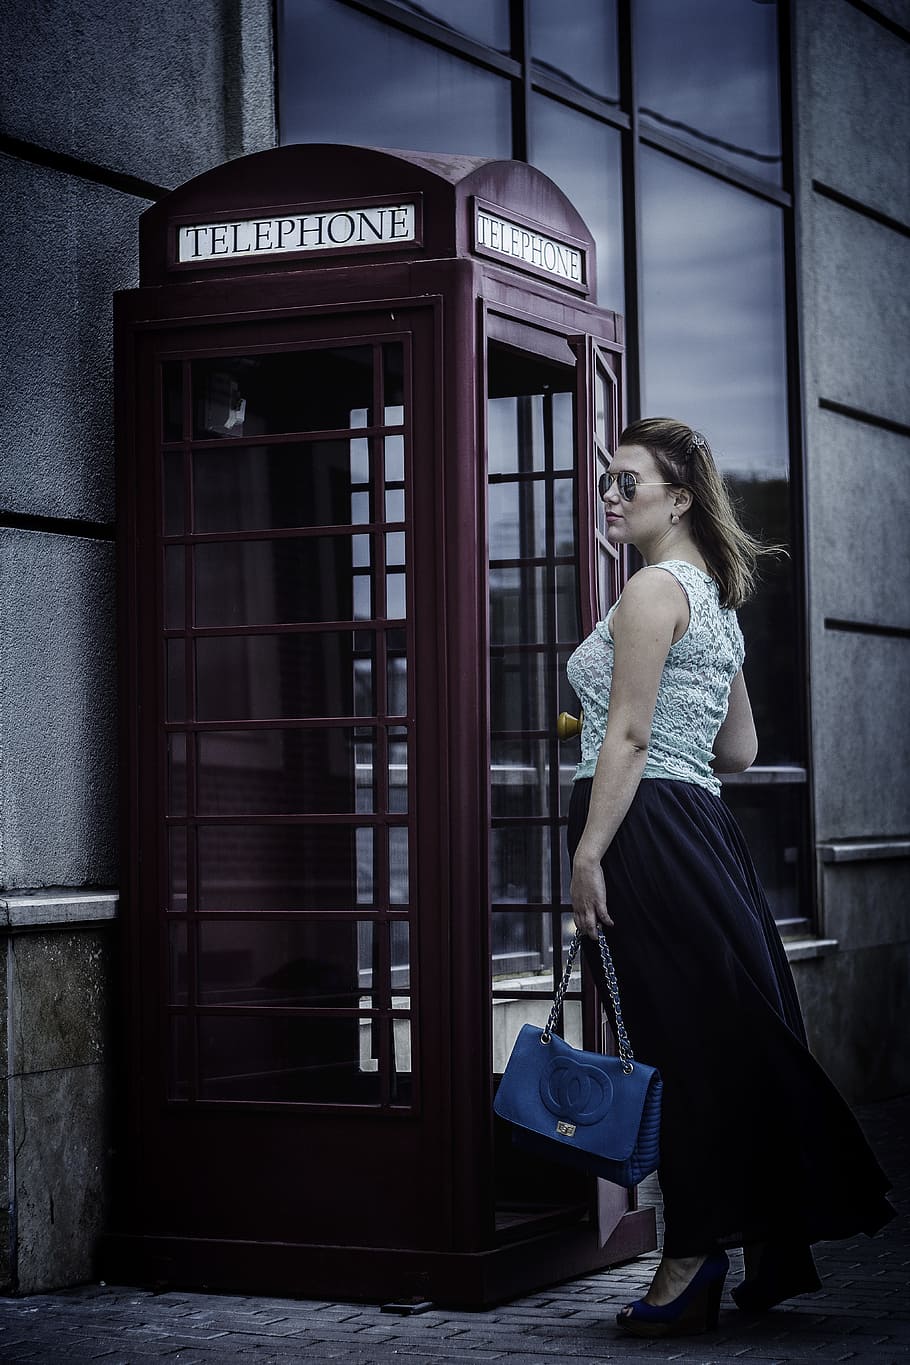 woman standing in front of telephone booth, london, fog, girl